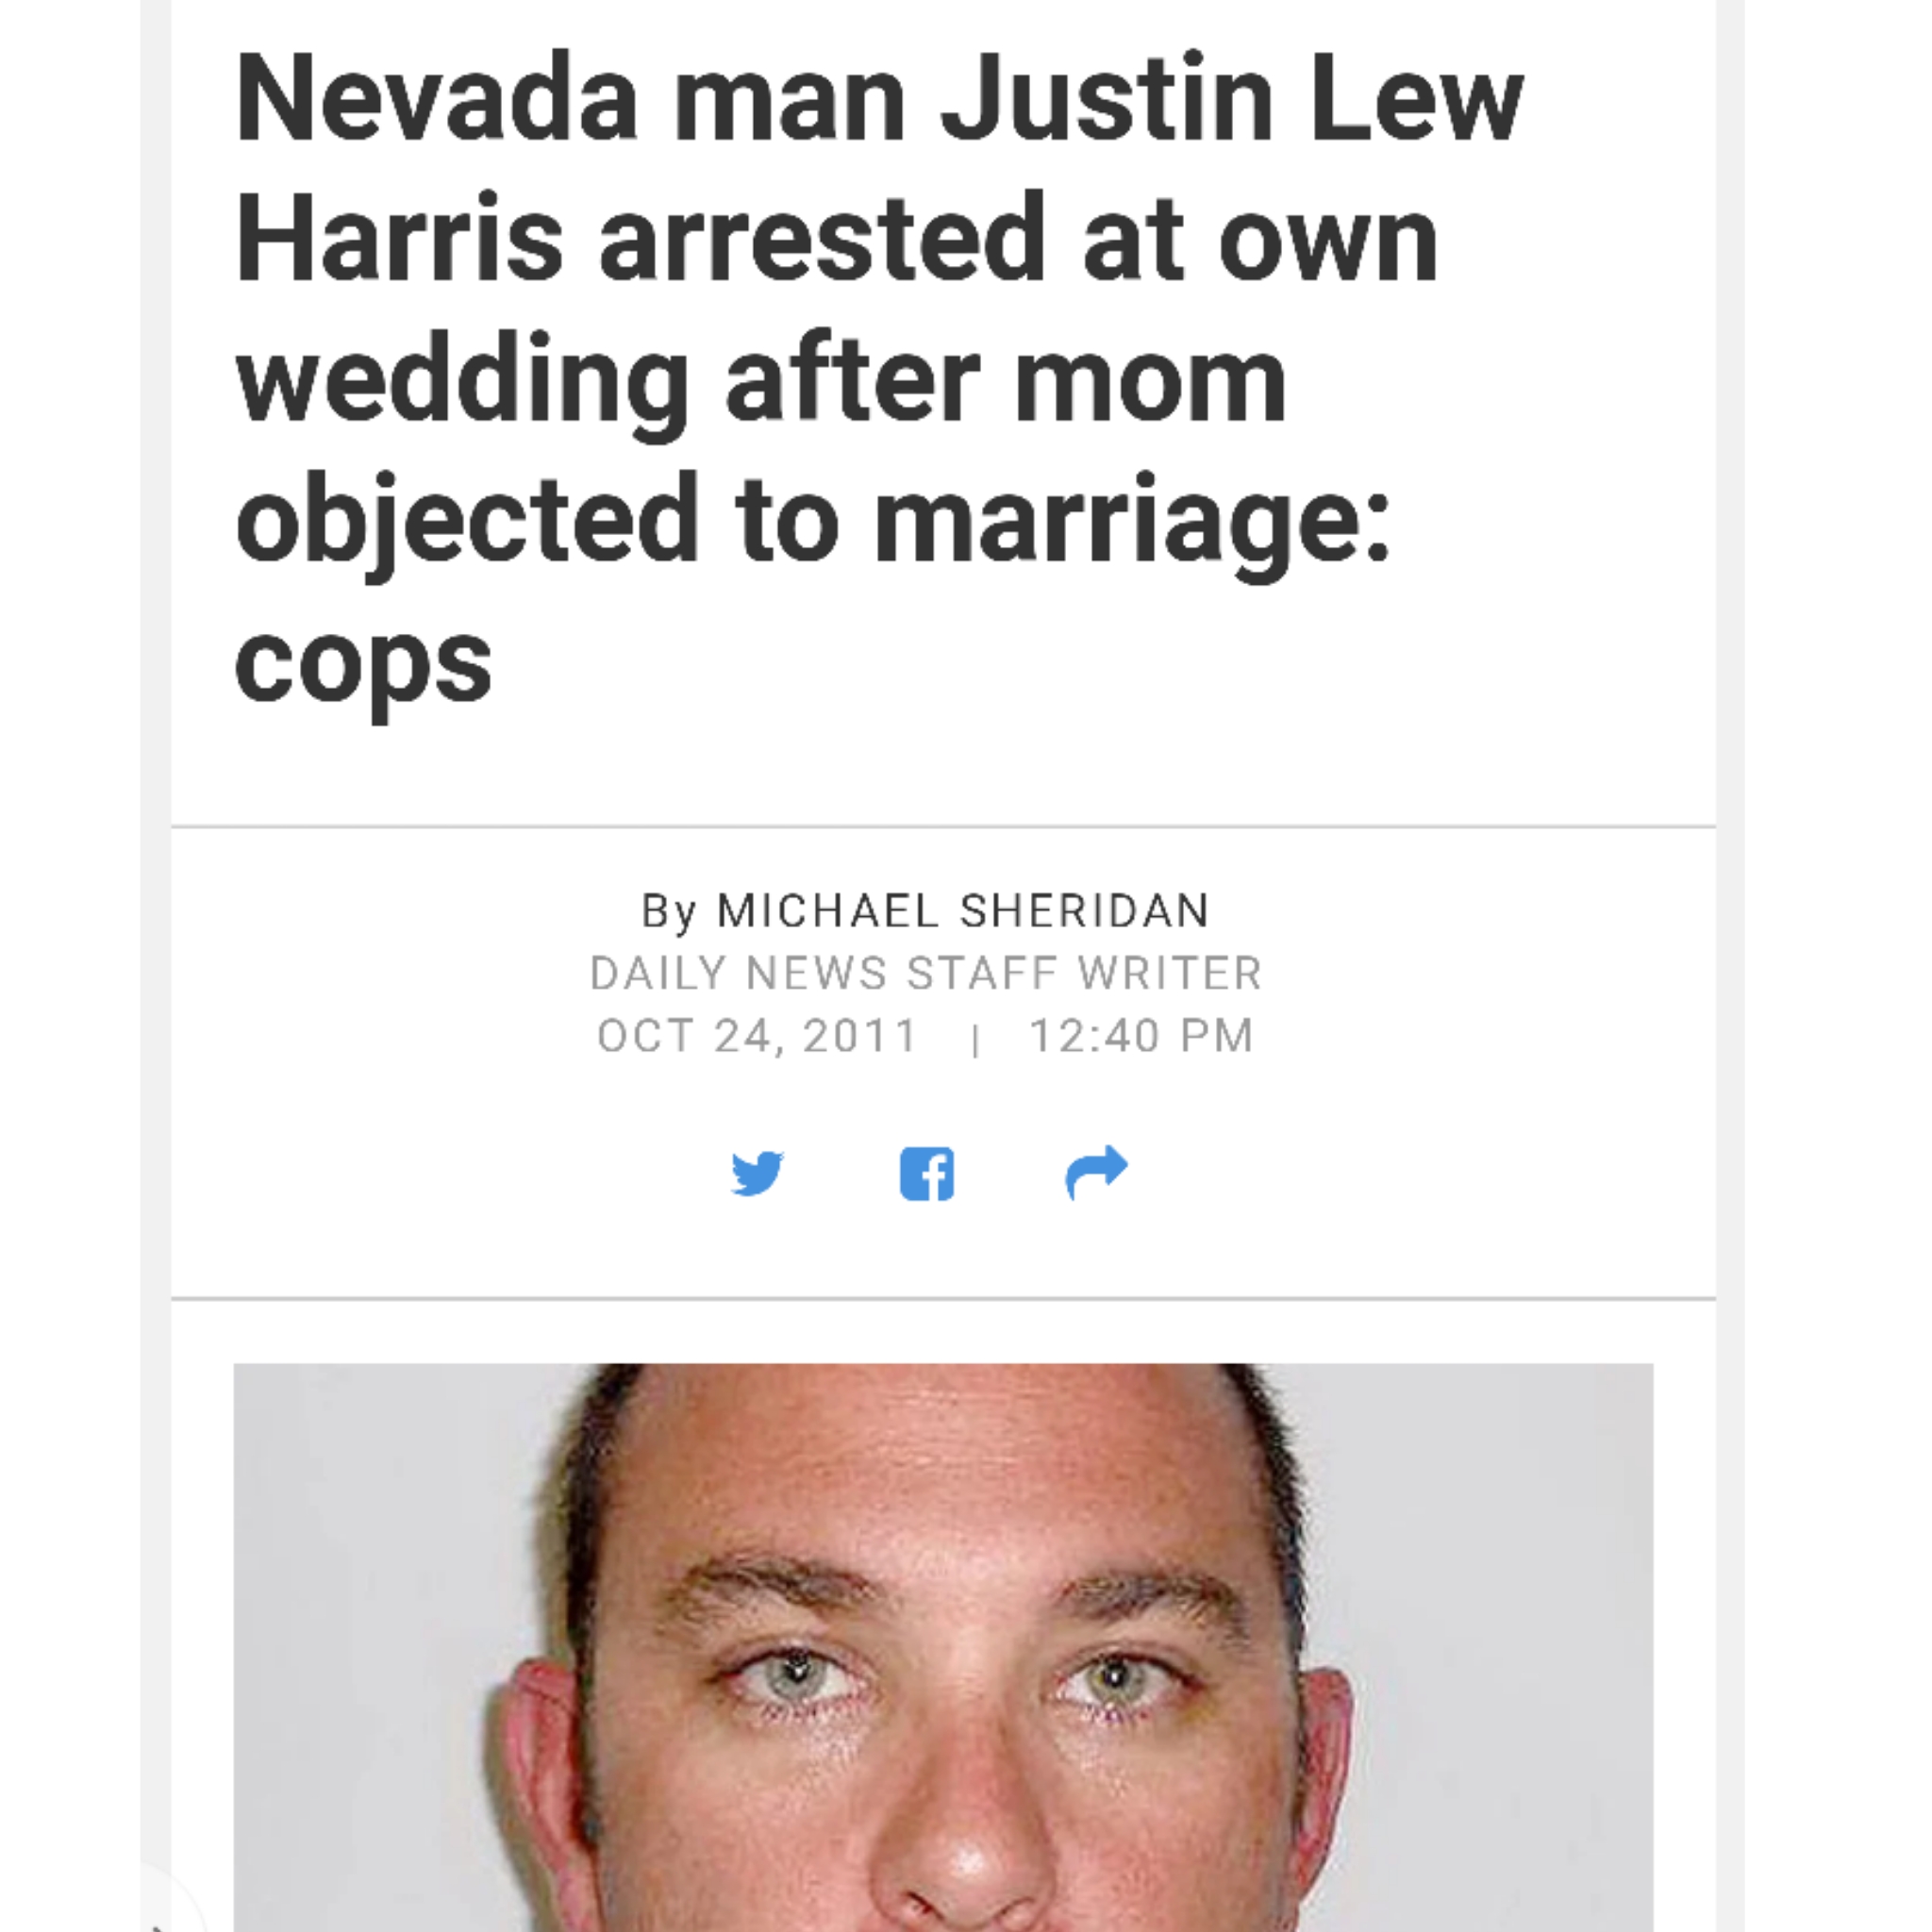 florida man headlines - Nevada man Justin Lew Harris arrested at own wedding after mom objected to marriage cops By Michael Sheridan Daily News Staff Writer